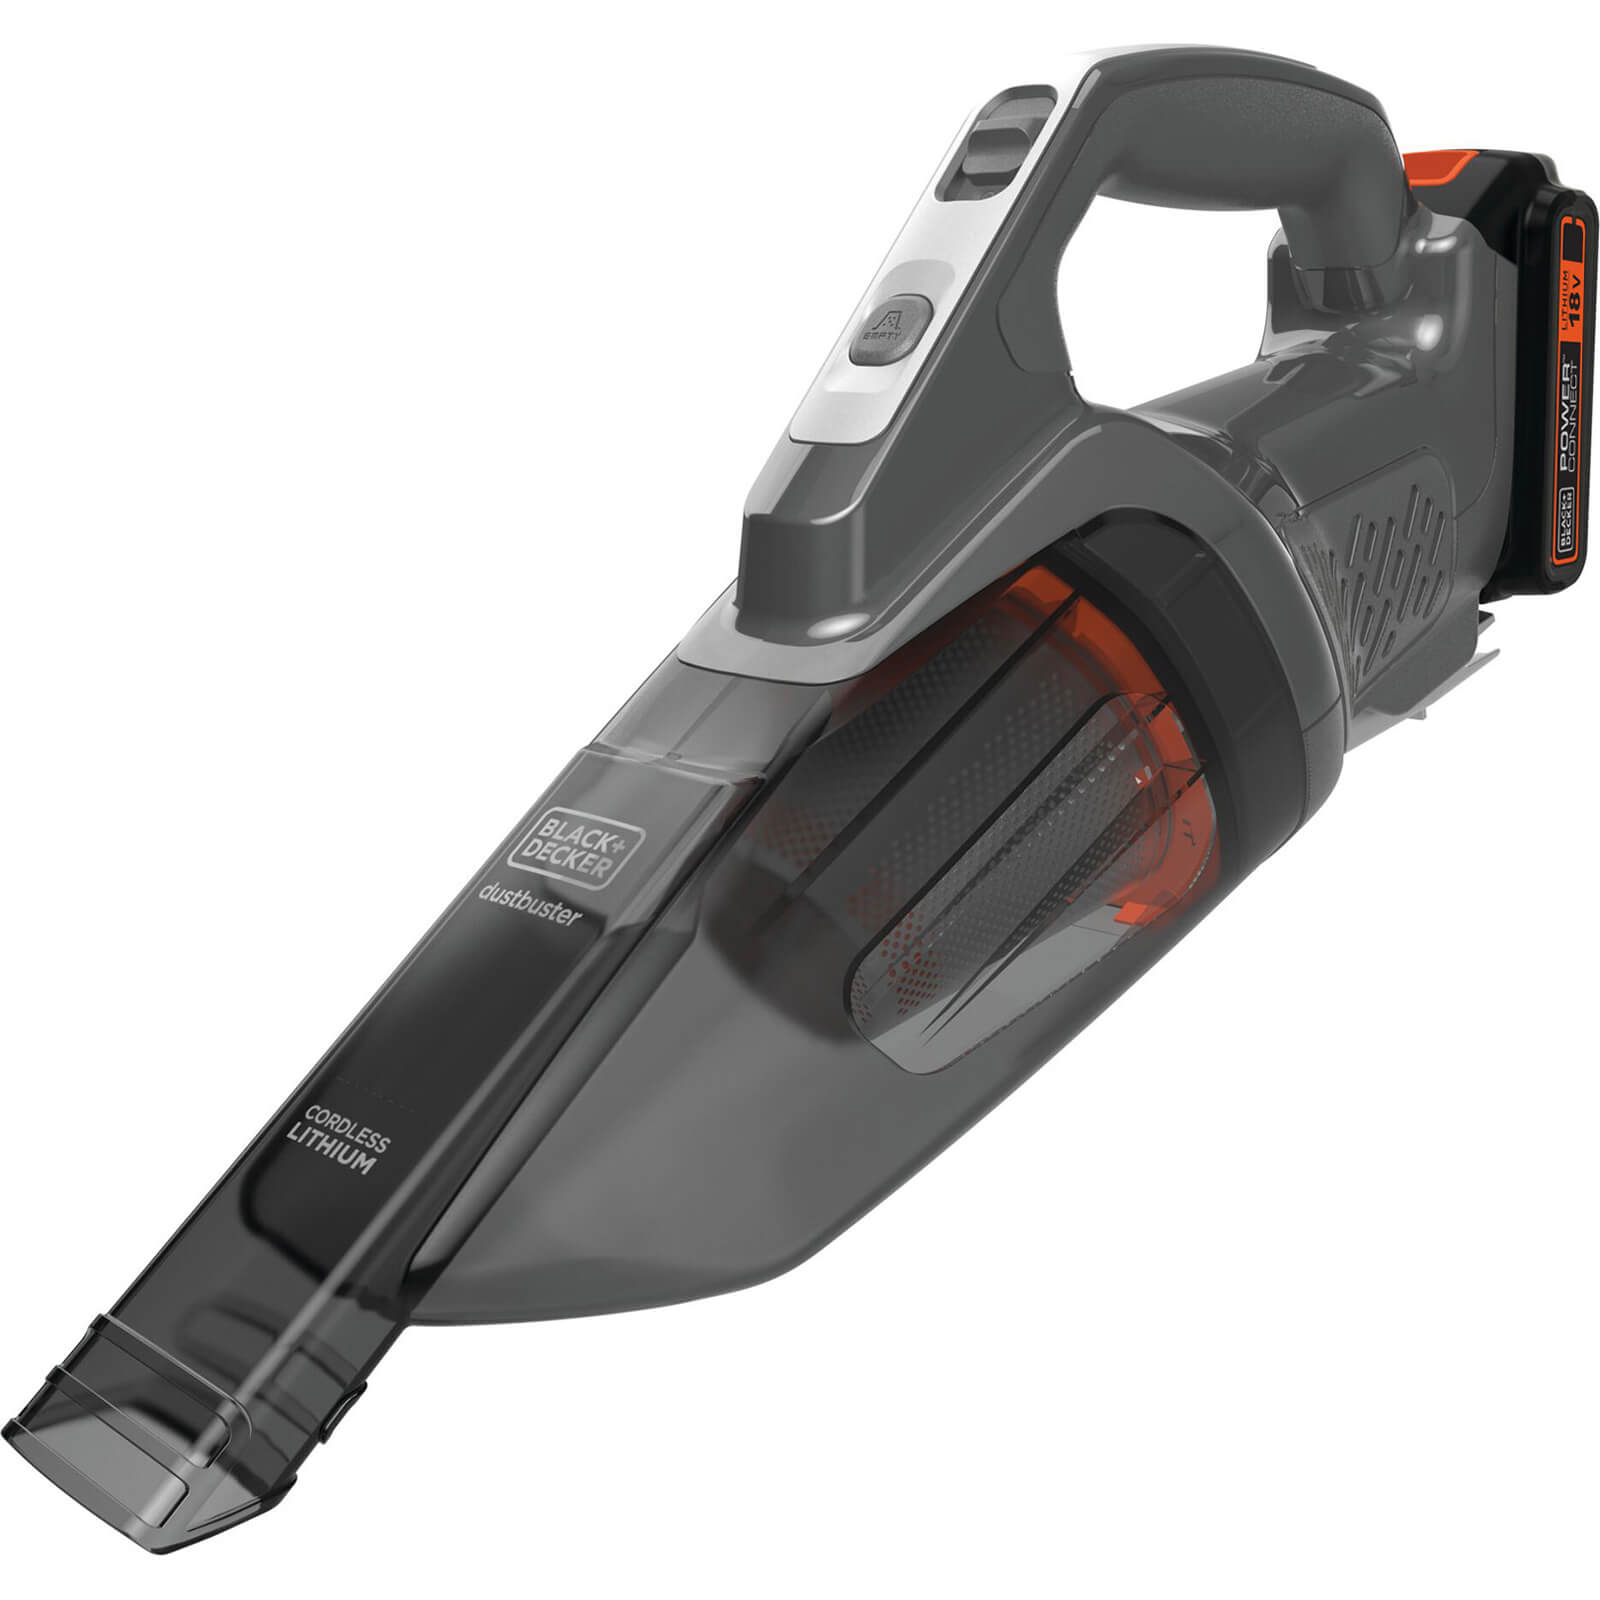 Image of Black and Decker BCHV001 18v Cordless Hand Dustbuster 1 x 1.5ah Li-ion Charger No Case